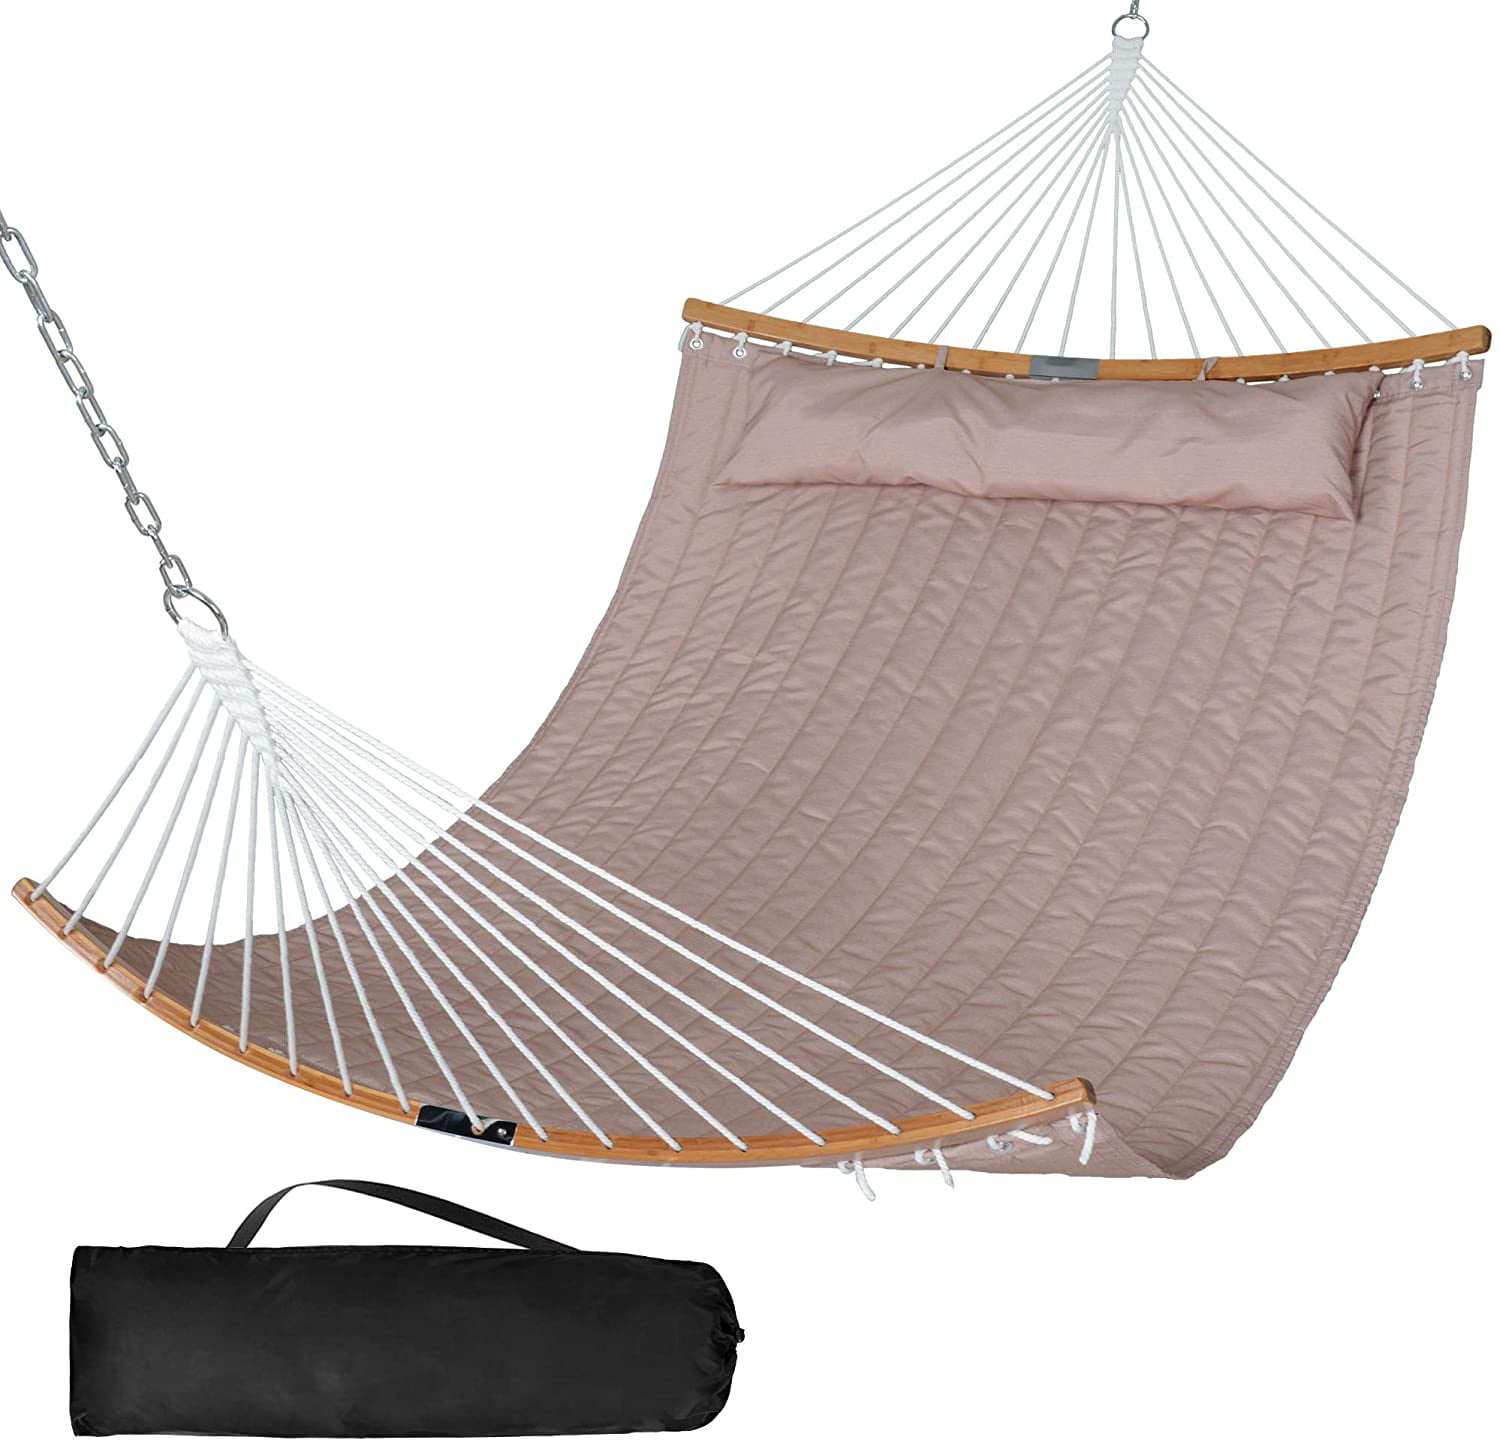 Ohuhu Double Hammock Quilted Fabric Swing with Strong Curved-Bar Bamboo & Pillow 